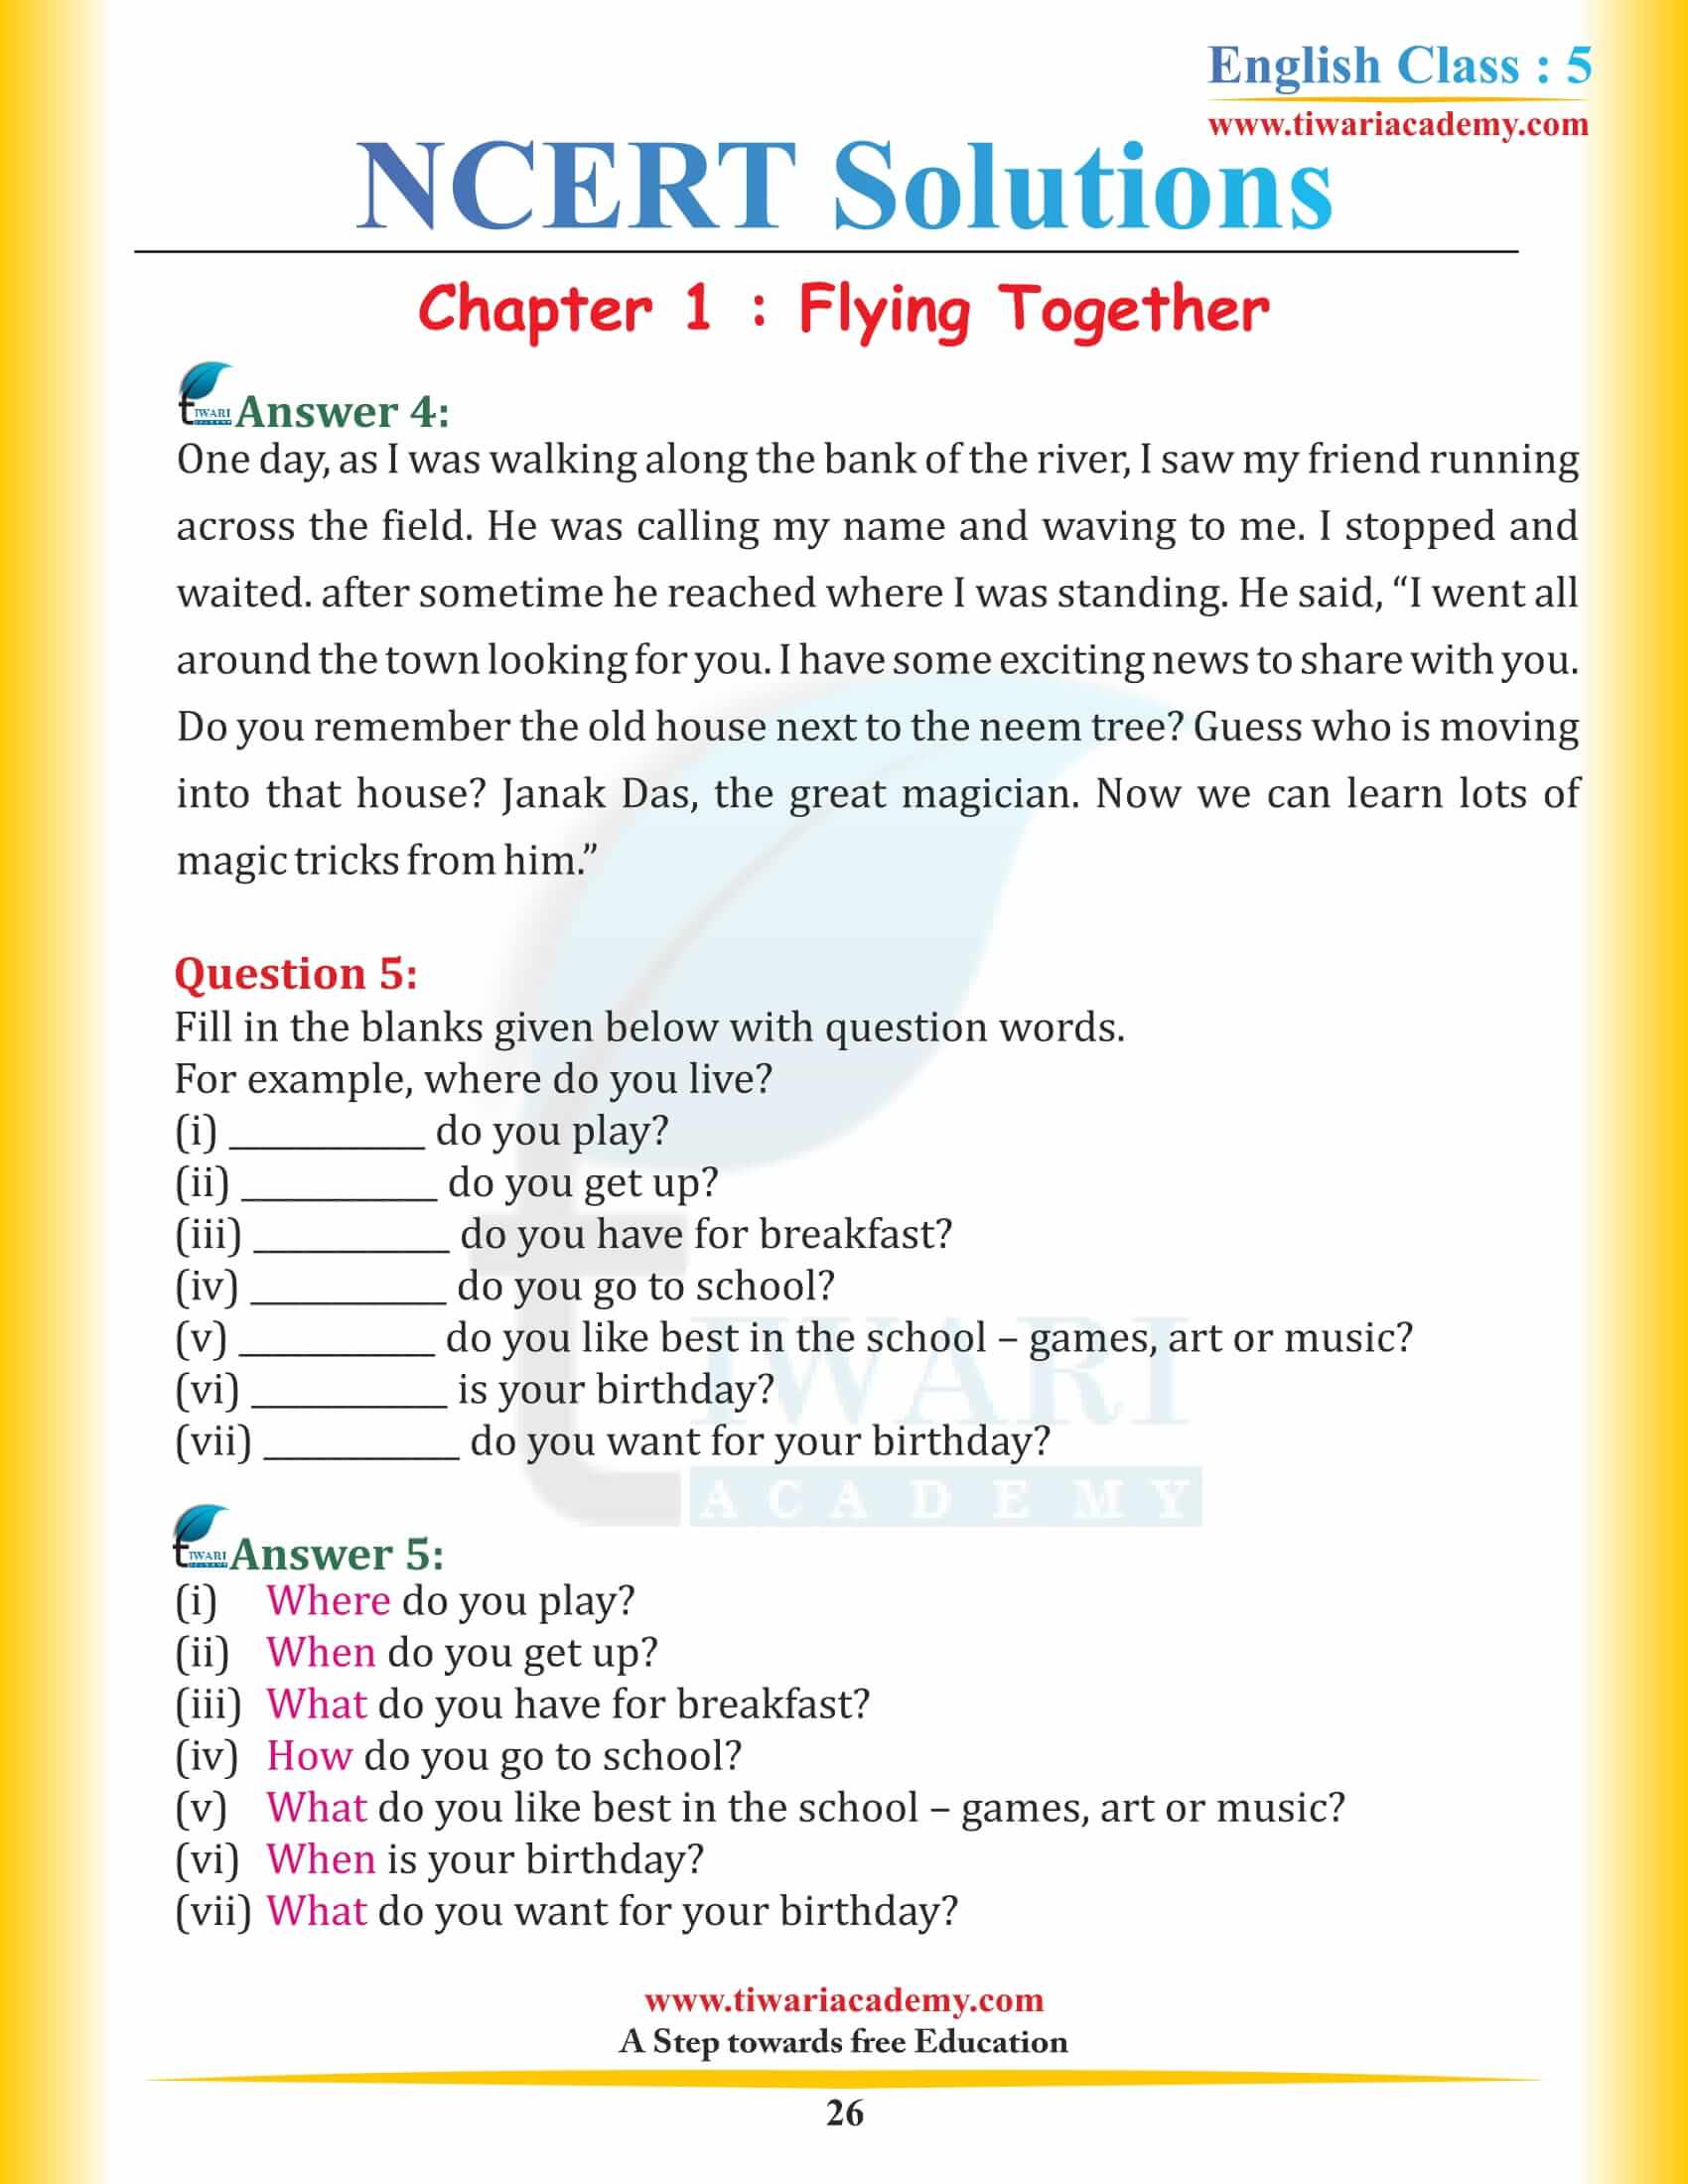 NCERT Solutions Class 5 English Chapter 1 Flying Together in PDF